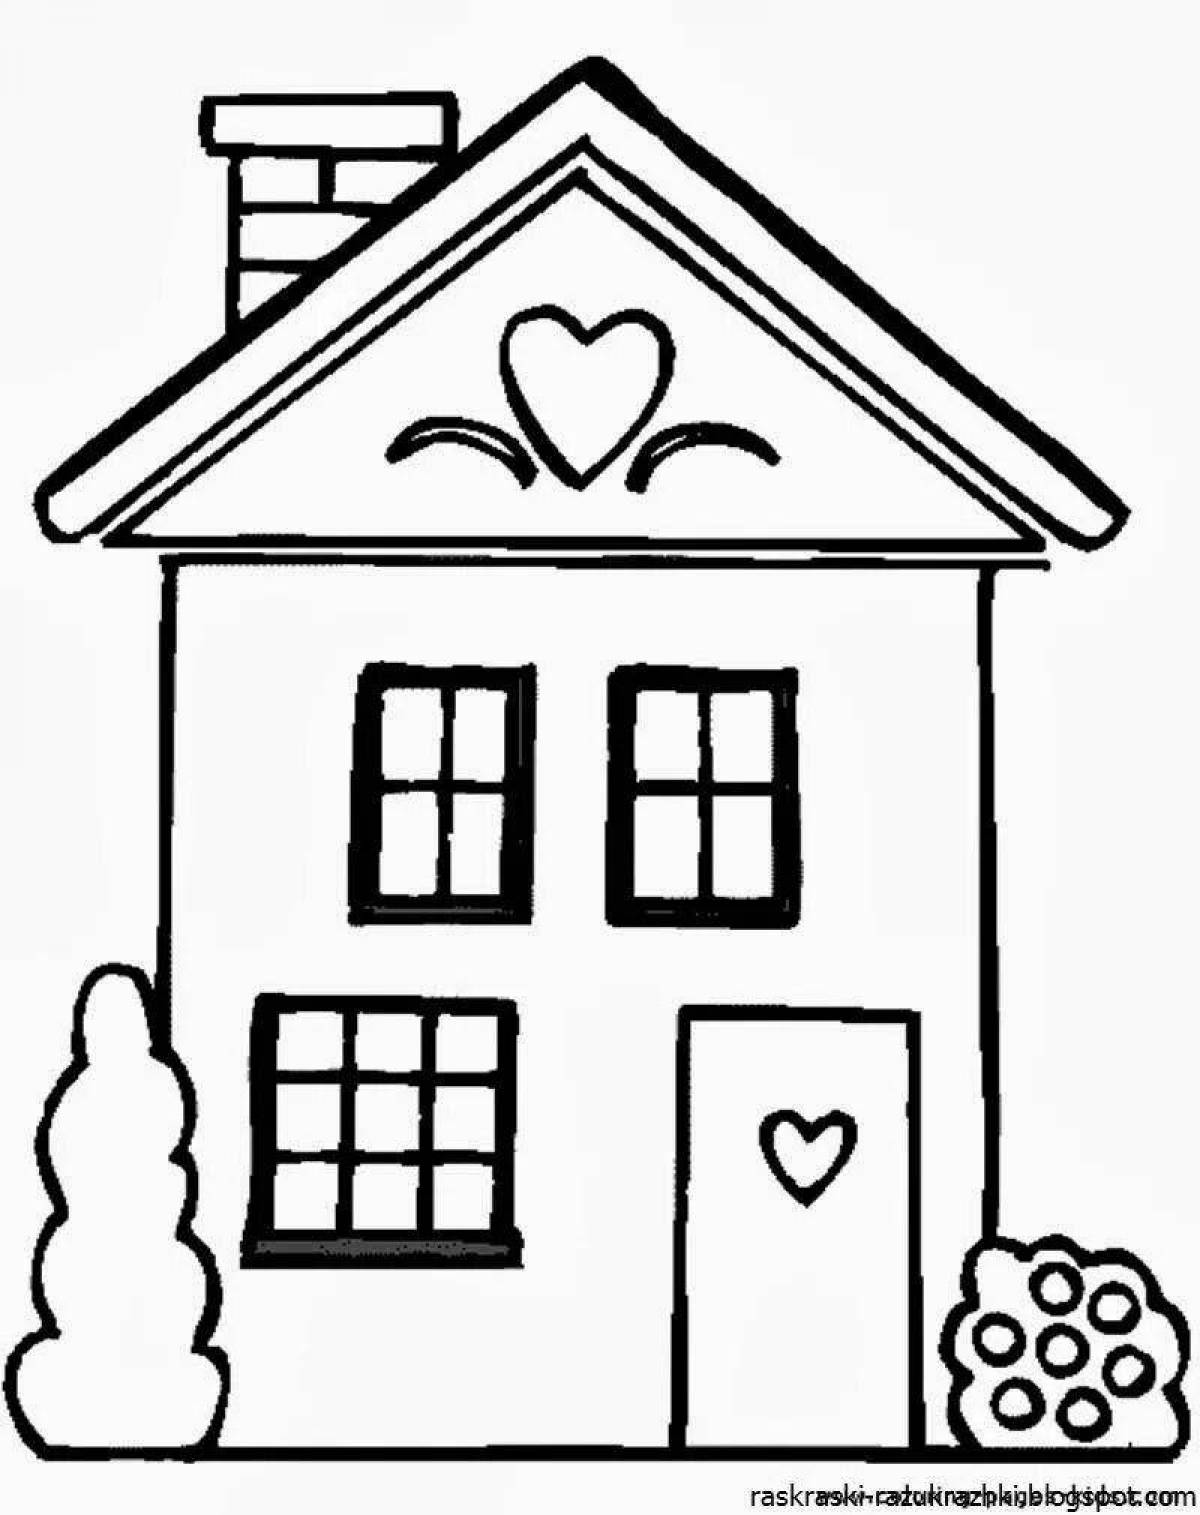 Adorable simple house coloring book for kids